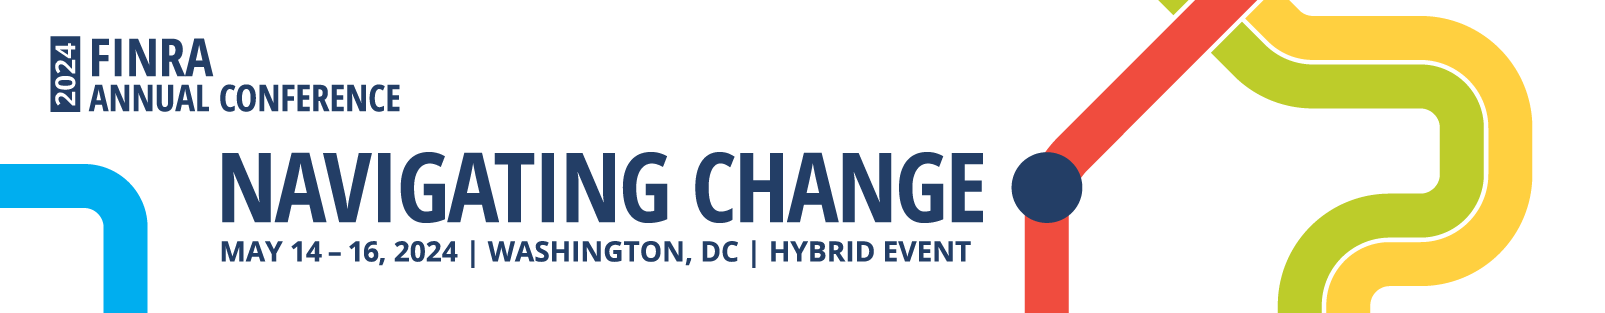 2024 FINRA Annual Conference | May 14-16 | Washington, DC